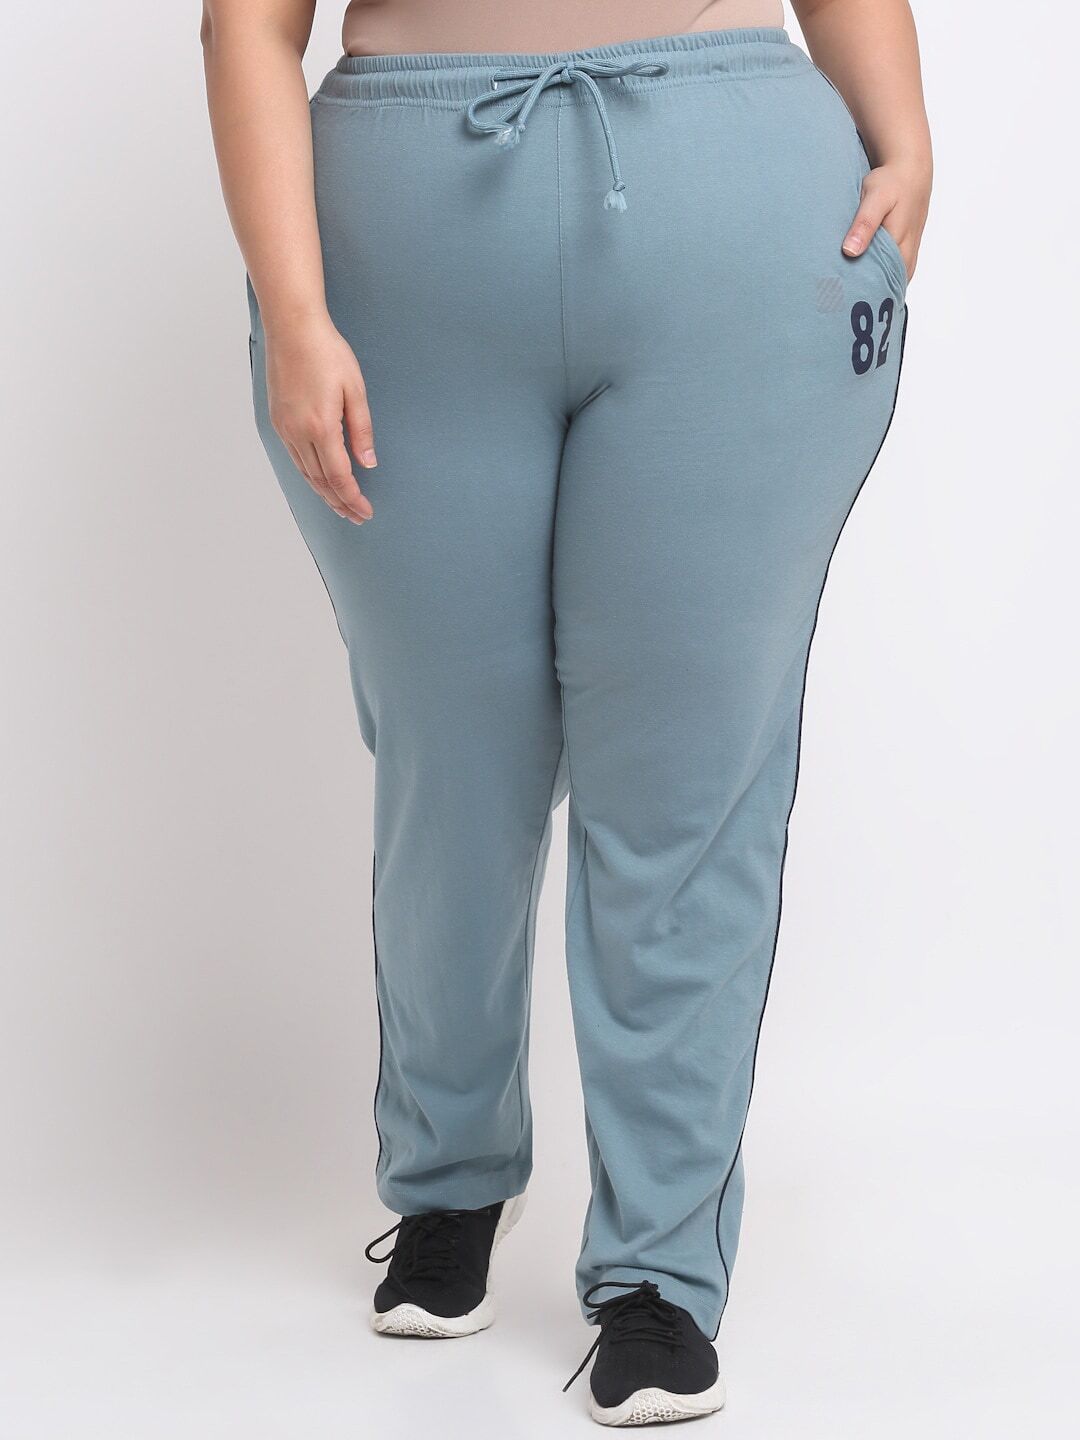 Comfort Lady Plus Size Lounger Pants – Comfort Lady Private Limited